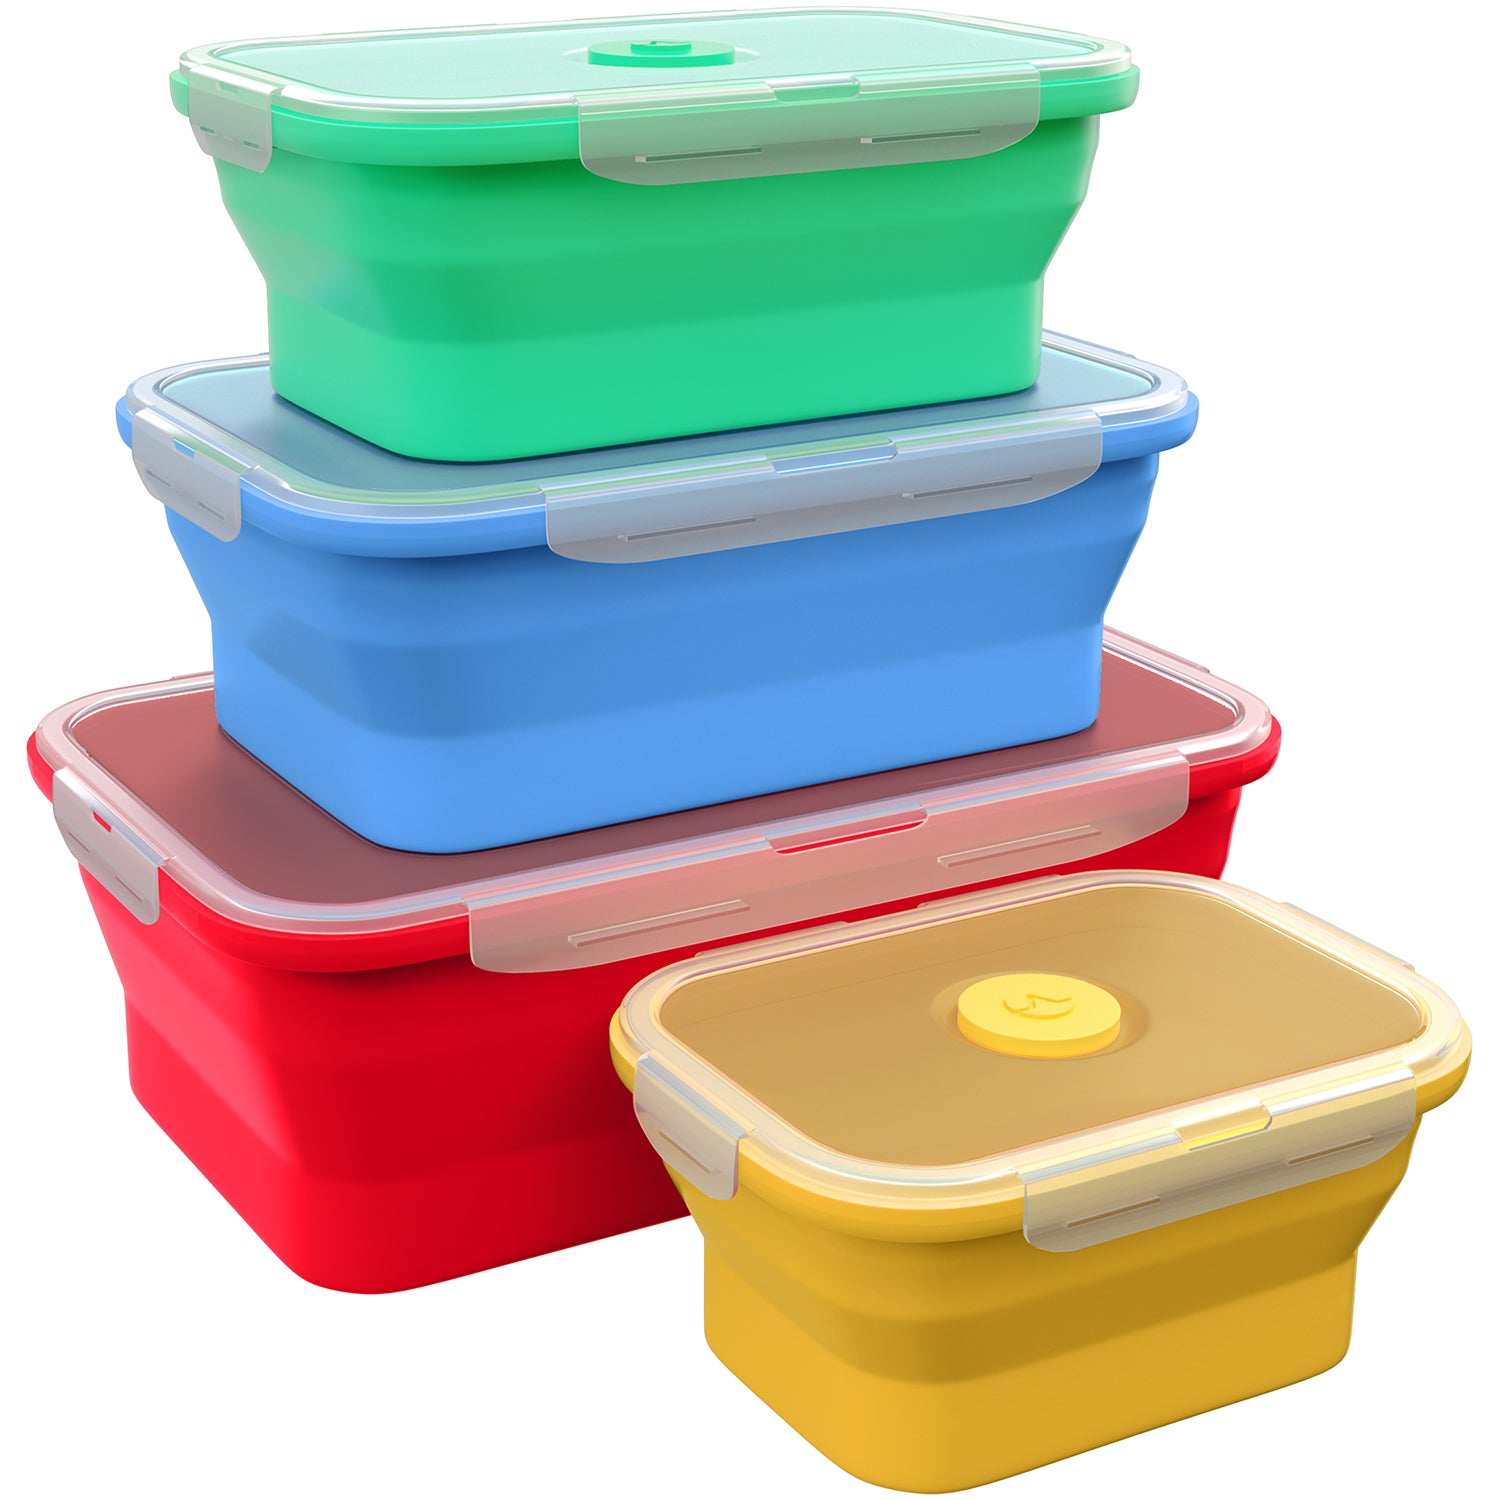 Ecoberi Collapsible Food Storage Containers, Airtight Snap-Top Lids, Microwave, Dishwasher Safe, BPA Free Silicone, Set of 5